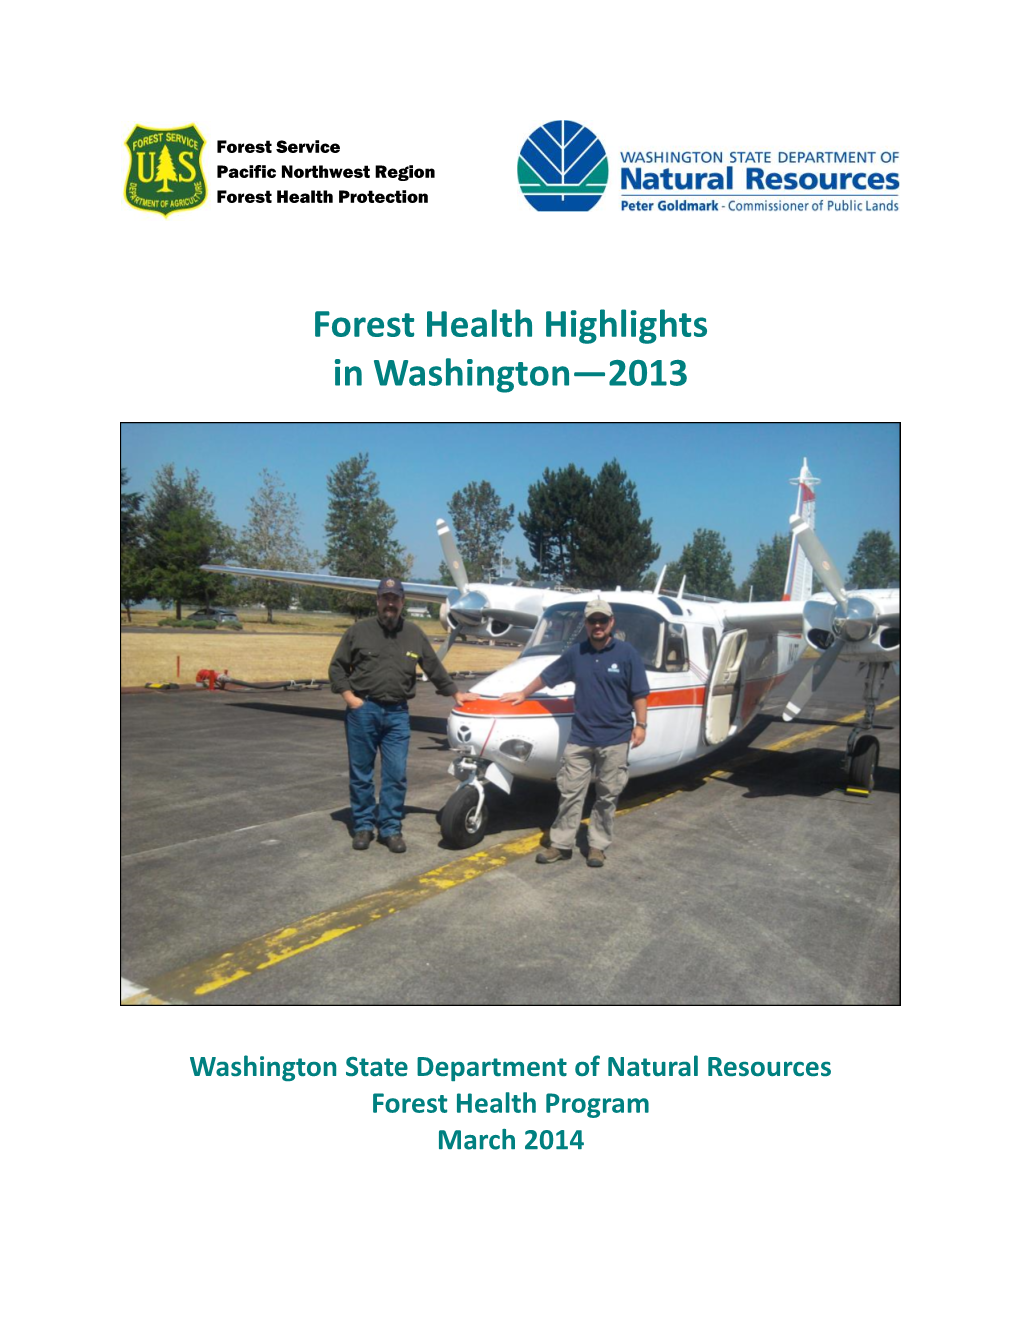 Forest Health Highlights in Washington—2013